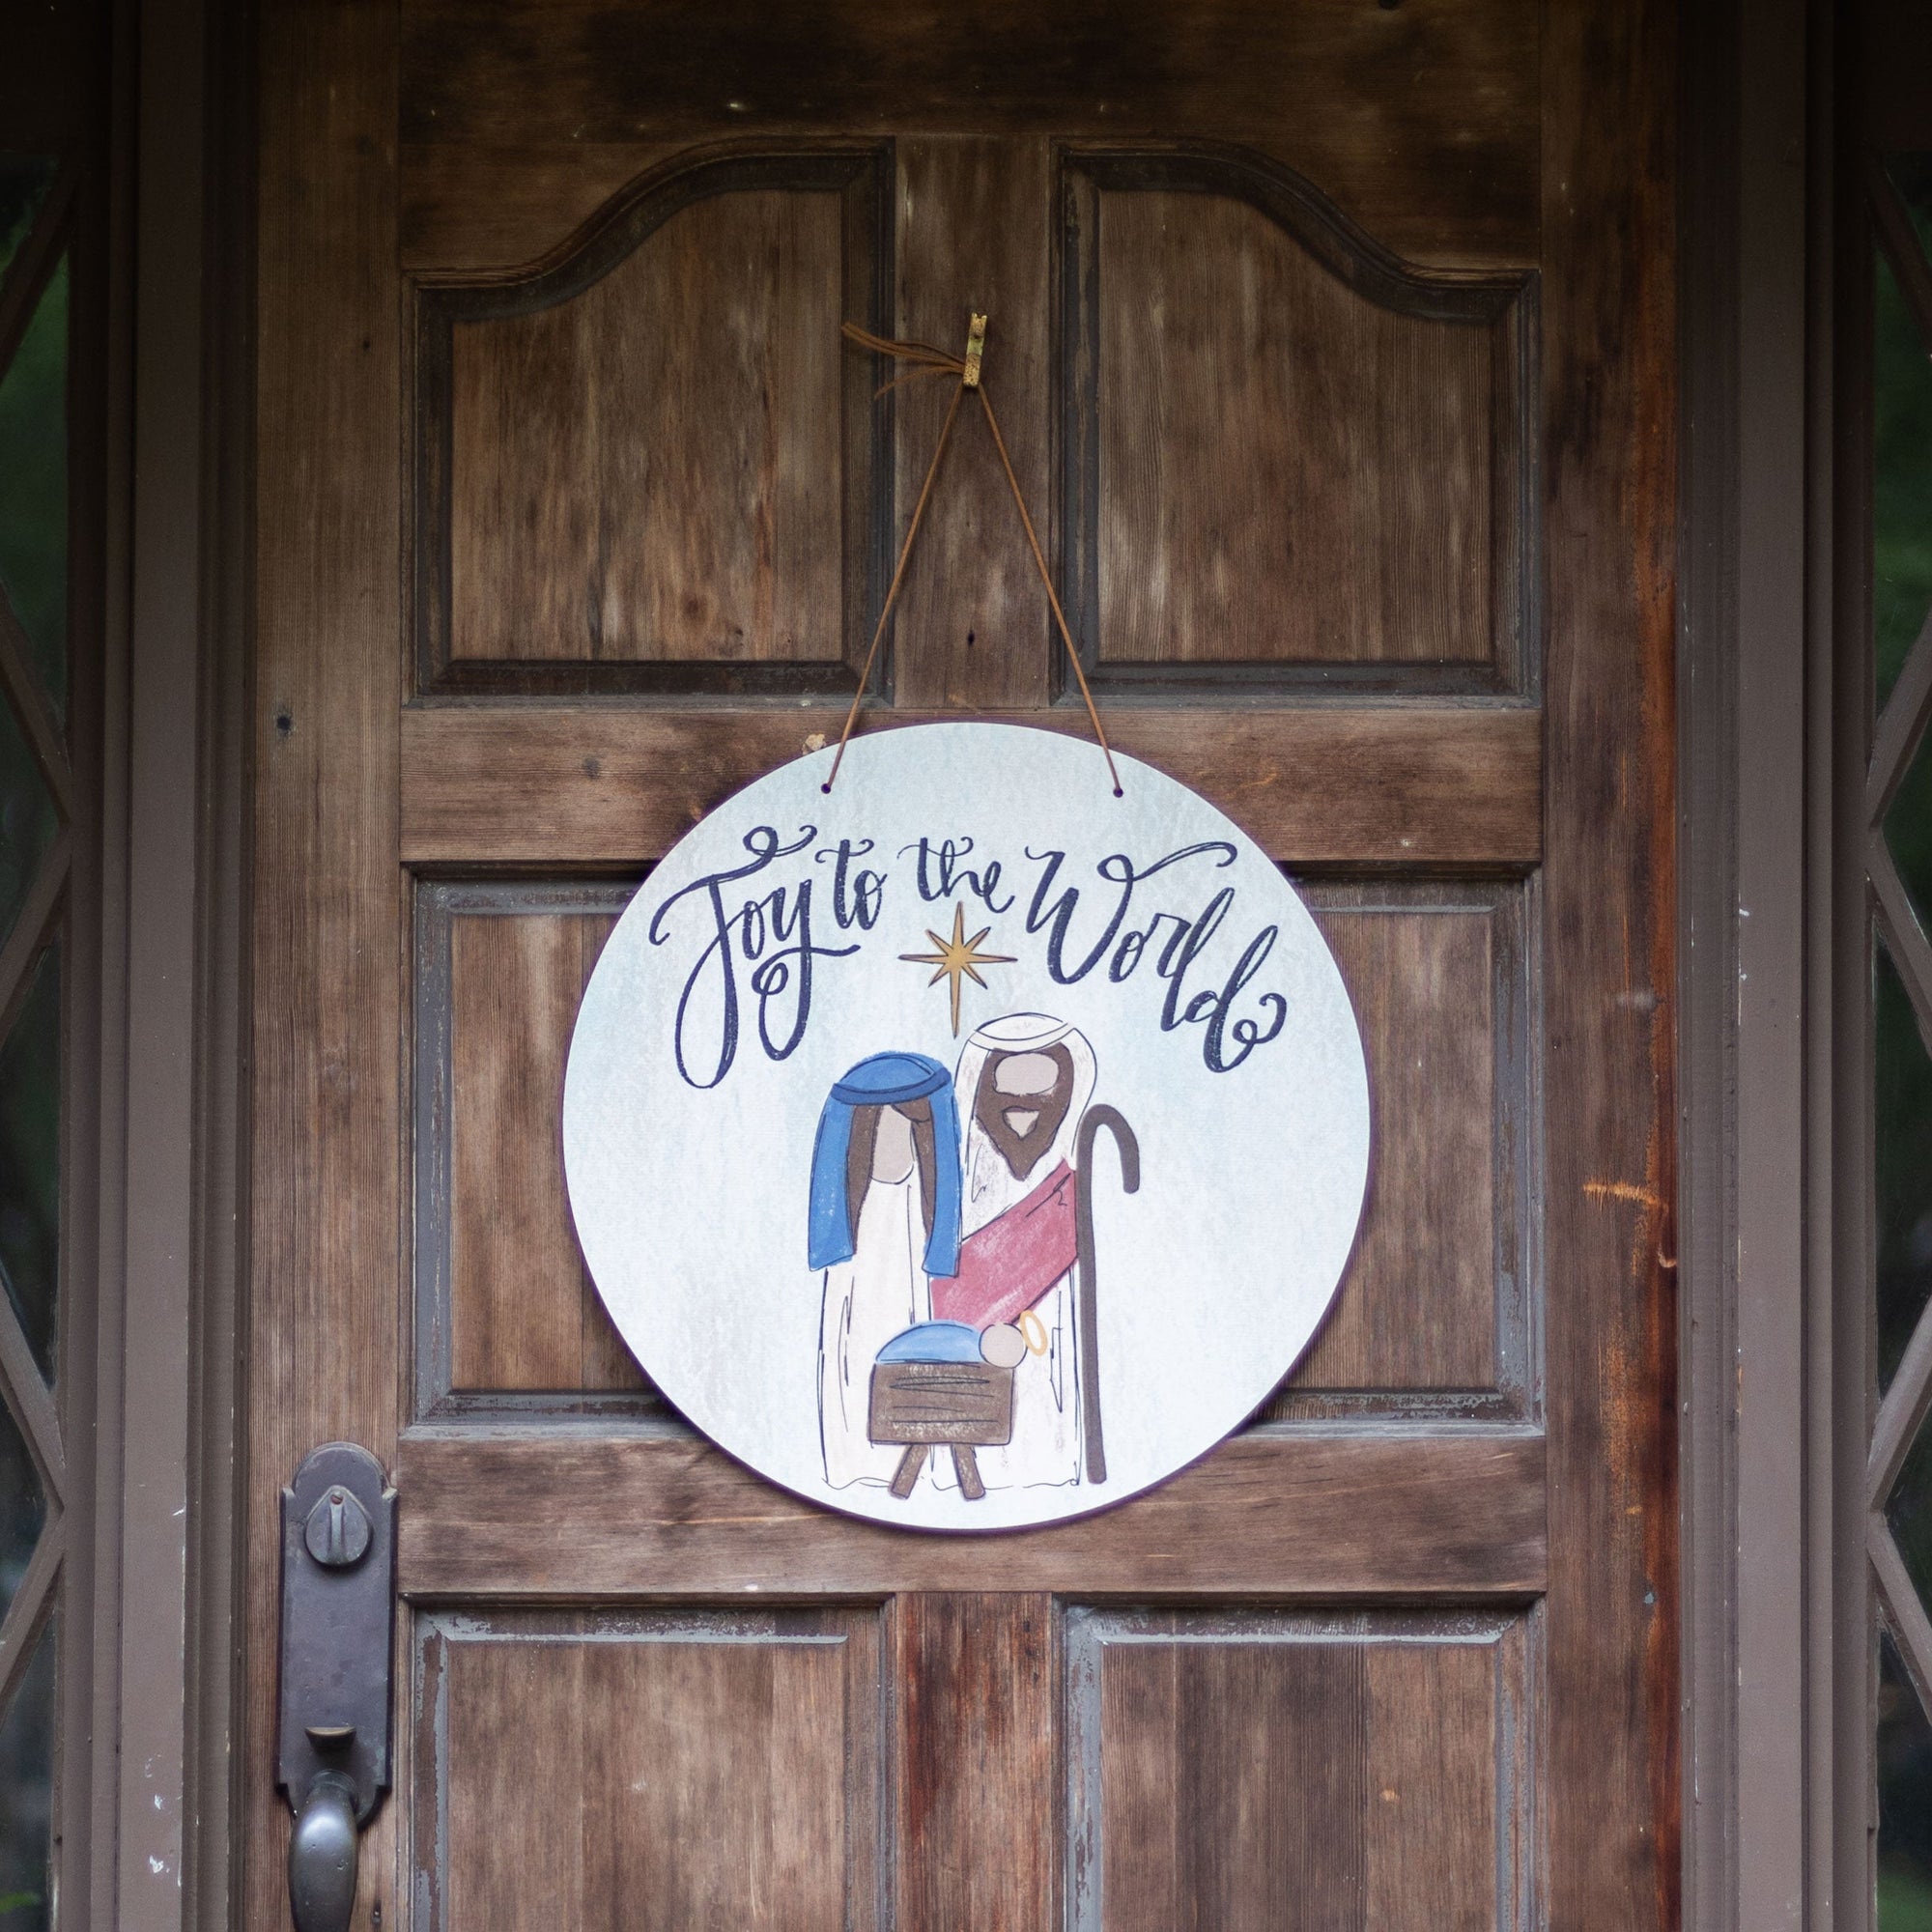 Front View. Christmas Door Hanger, Whimsy Nativity Outdoor Ornament/Decor The WAREHOUSE Studio 